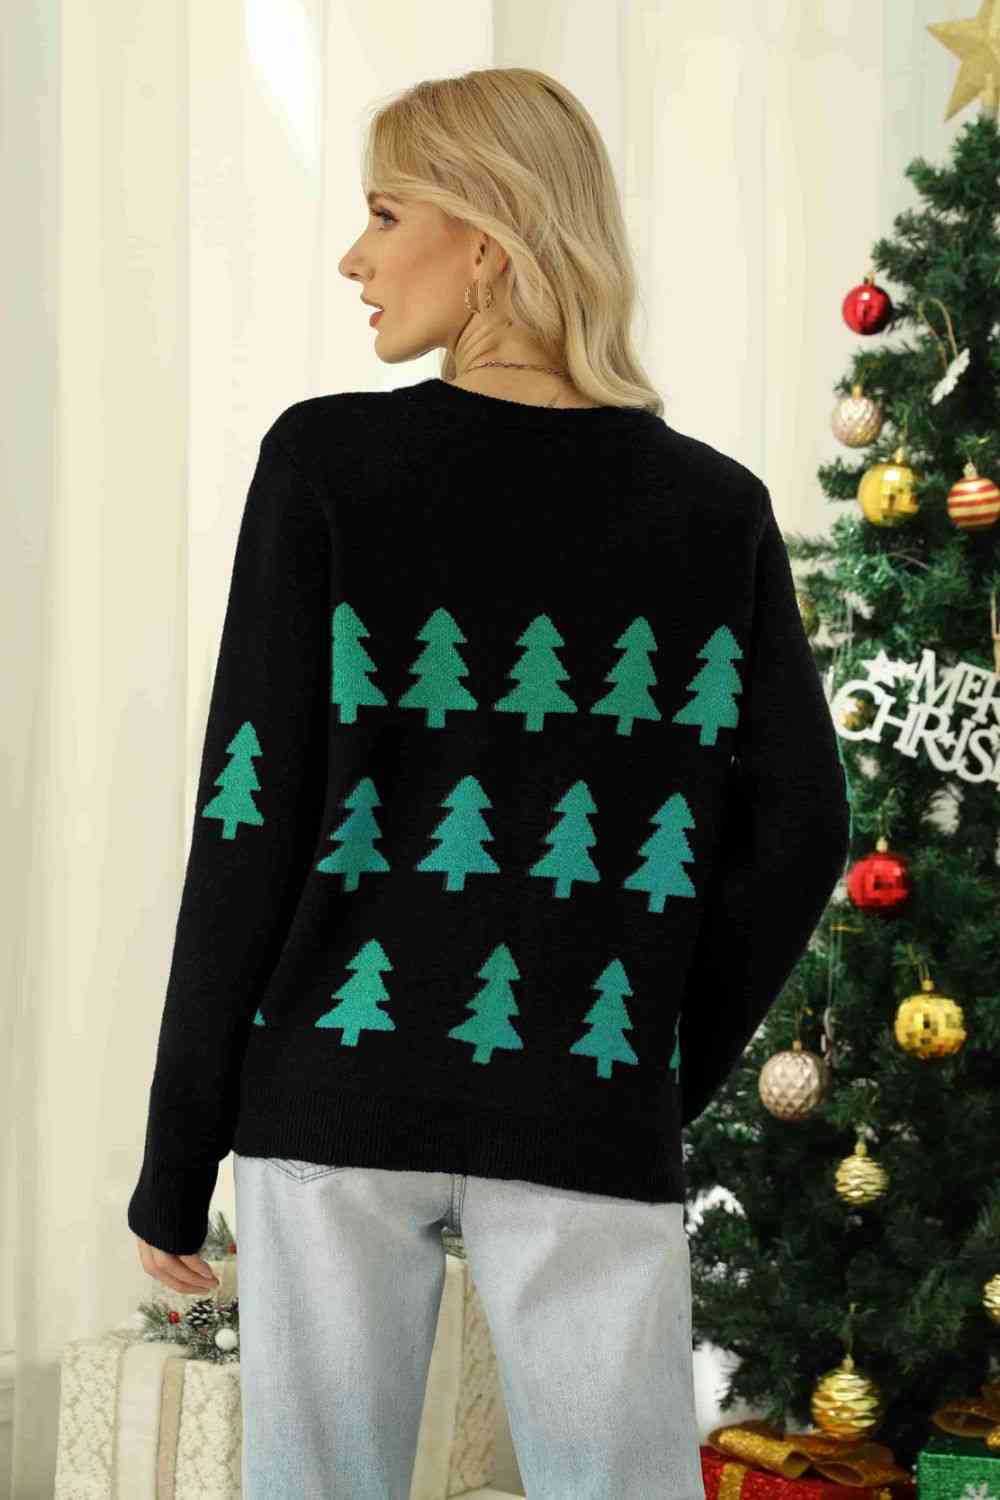 Christmas Tree Round Neck Ribbed Trim Sweater - Kawaii Stop - Casual, Christmas, Christmas Outfit, Christmas Tree Design, Comfortable, Cozy Winter Clothing, Fashion, Festive Attire, Festive Wear, Gift Idea, Holiday Fashion, Seasonal Wardrobe, Ship From Overseas, Stylish Apparel, Trendy, Unique Design, Winter Style, Yh